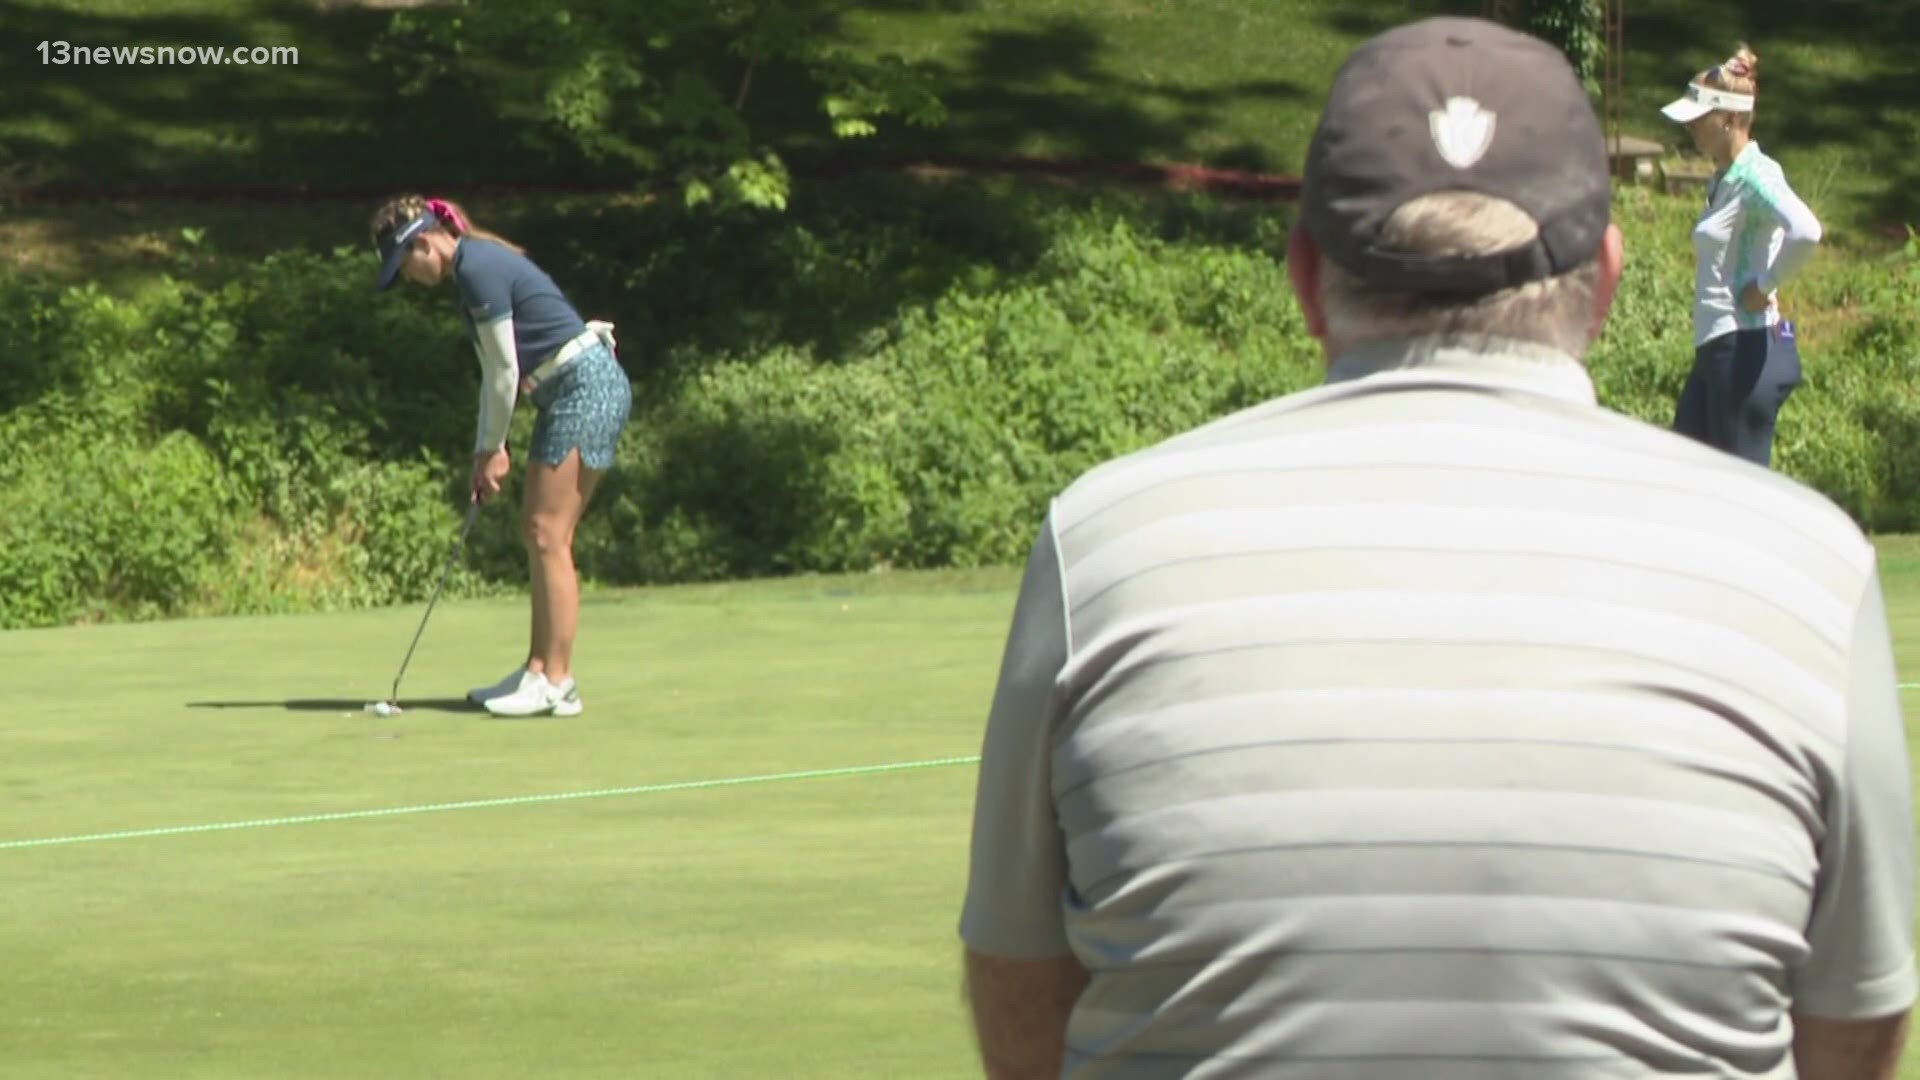 13News Now Connor Rhiel has more on the LPGA Tournament in Williamsburg where golfers from across the nation came to compete.